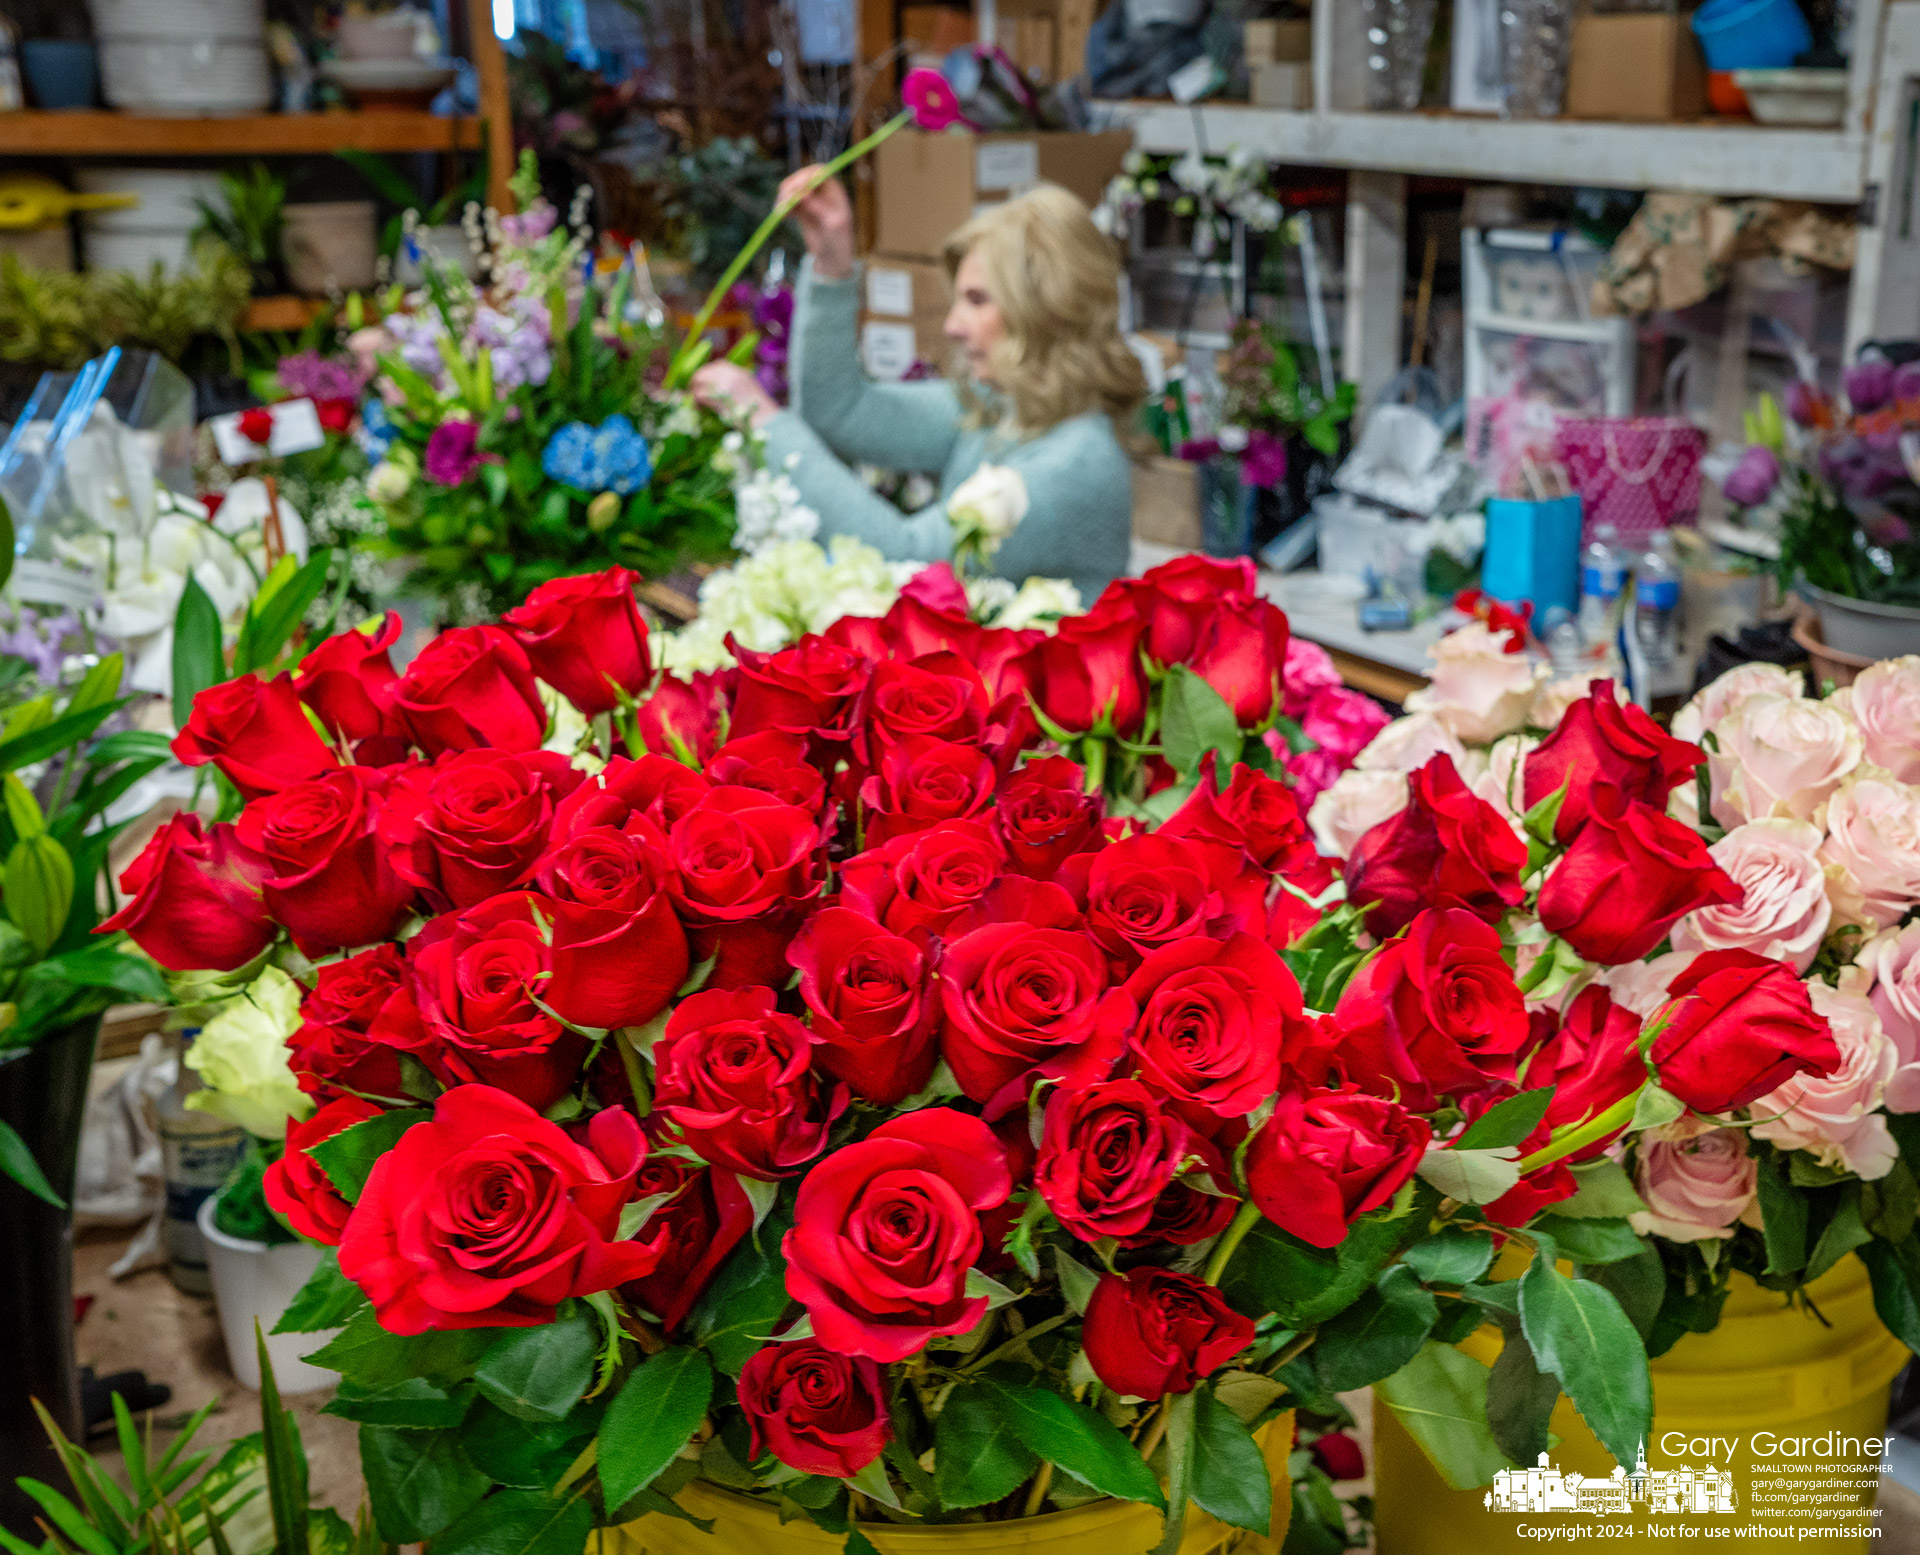 Vases filled with roses sit ready for arrangements at Talbott's Flowers in Uptown Westerville for delivery and sale to the affectionate on Valentine's Day. My Final Photo for February 14, 2024.